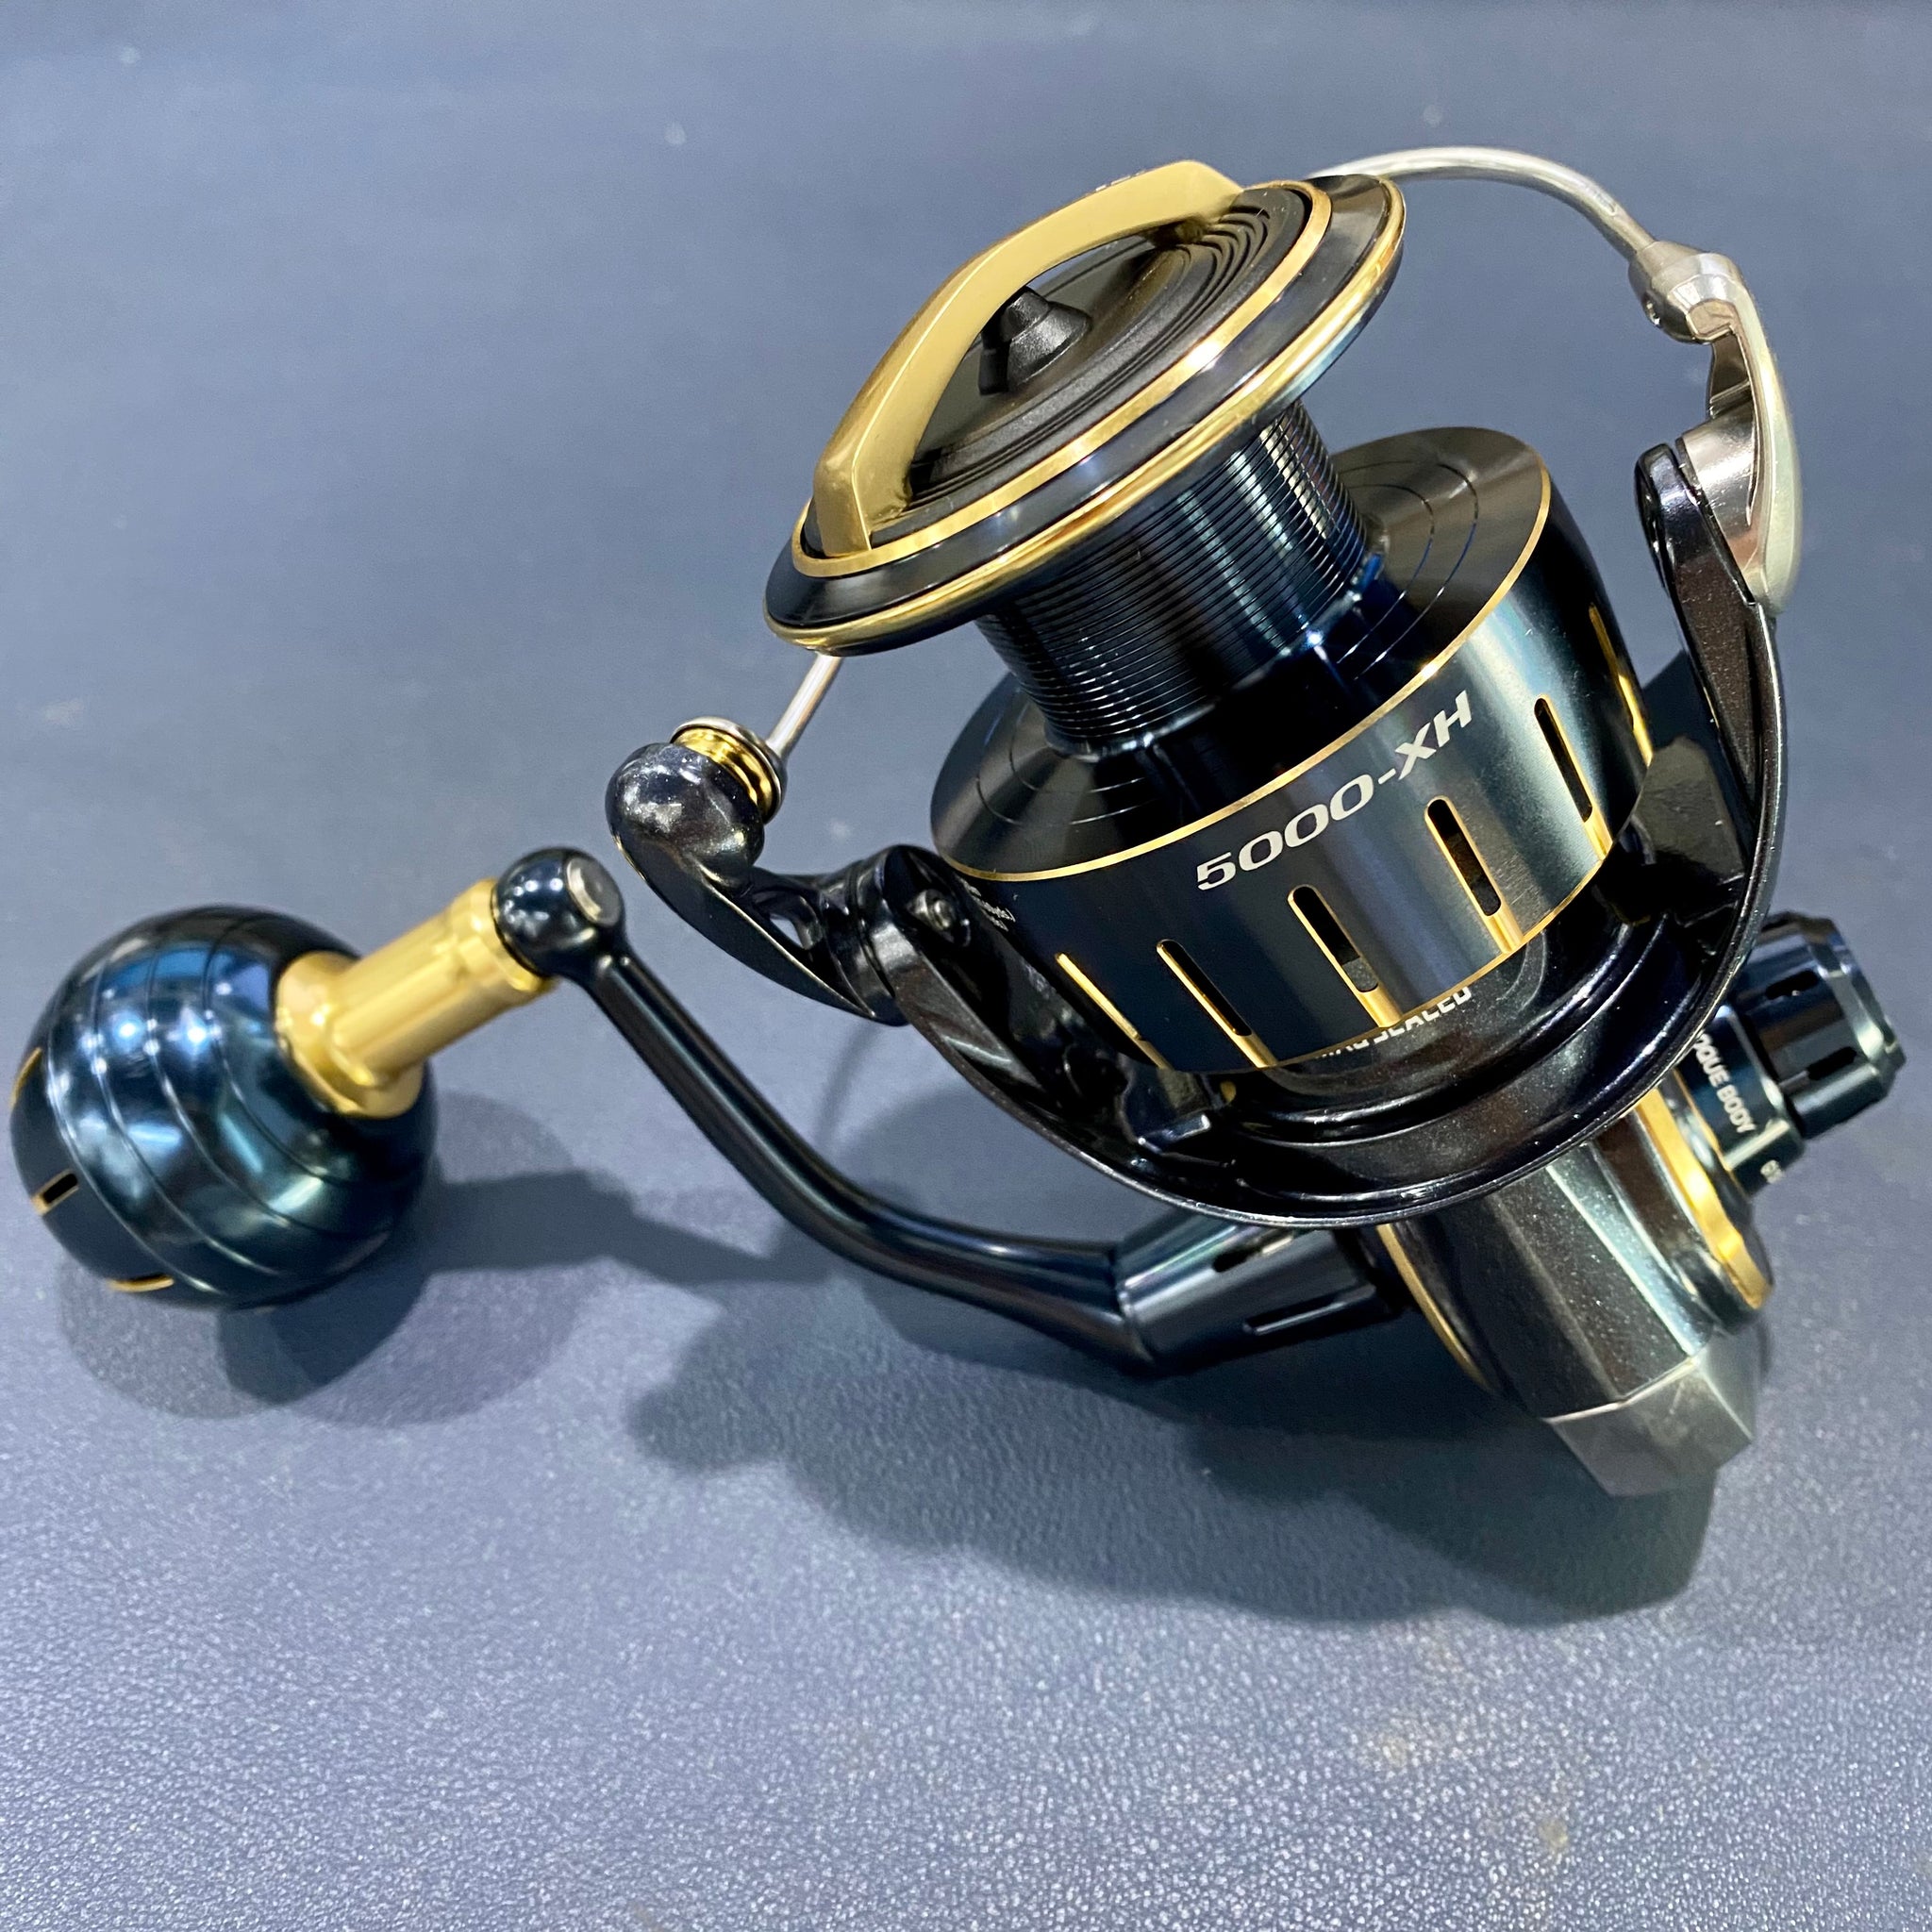 New Saltiga 23 reel, small size and high power